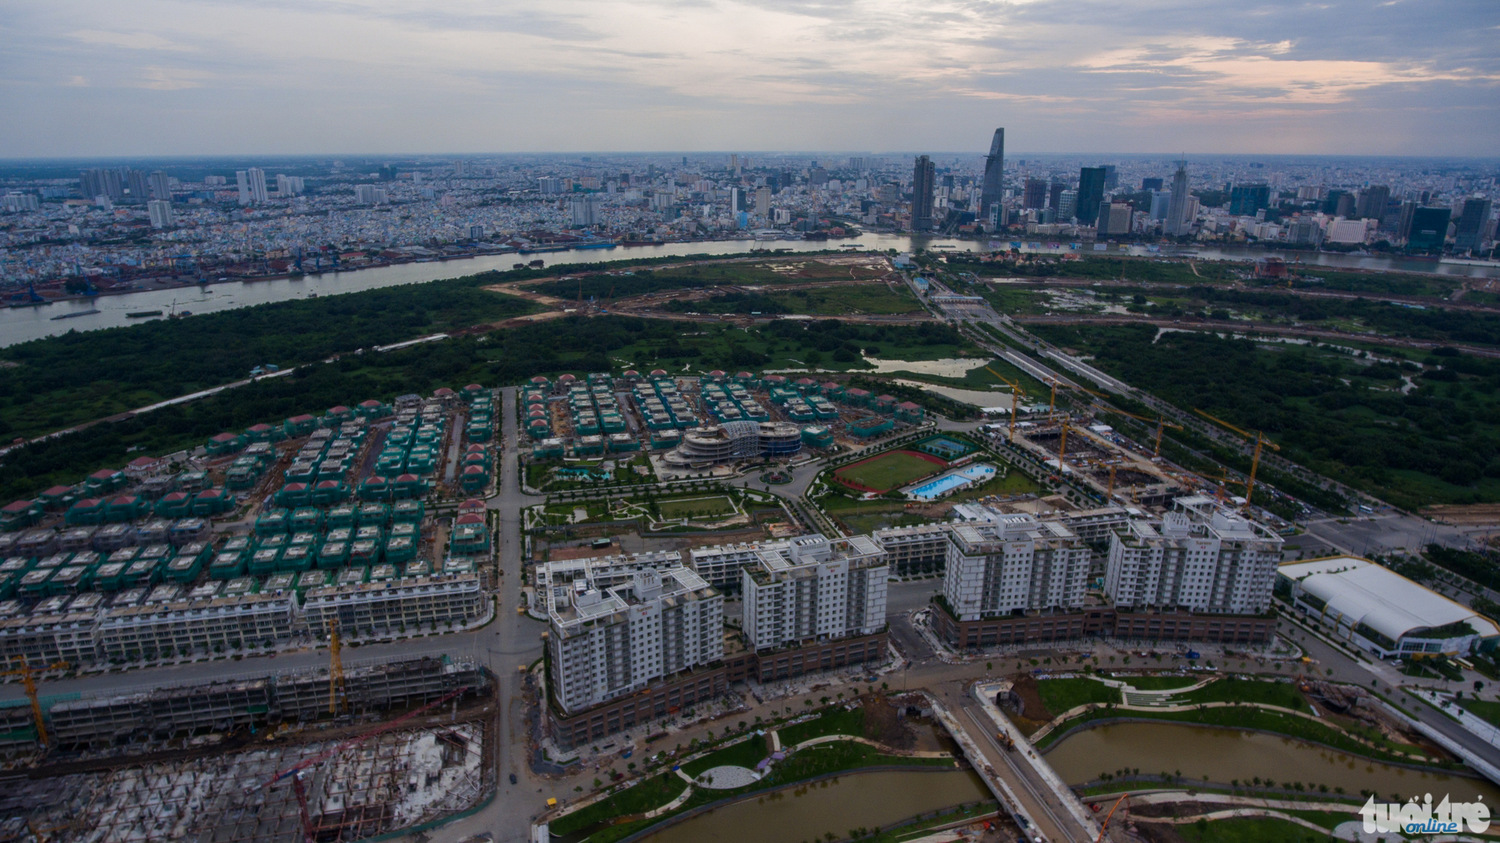 An aerial view of the under-development Thu Thiem New Urban Area in District 2, Ho Chi Minh City. Photo: Tuoi Tre